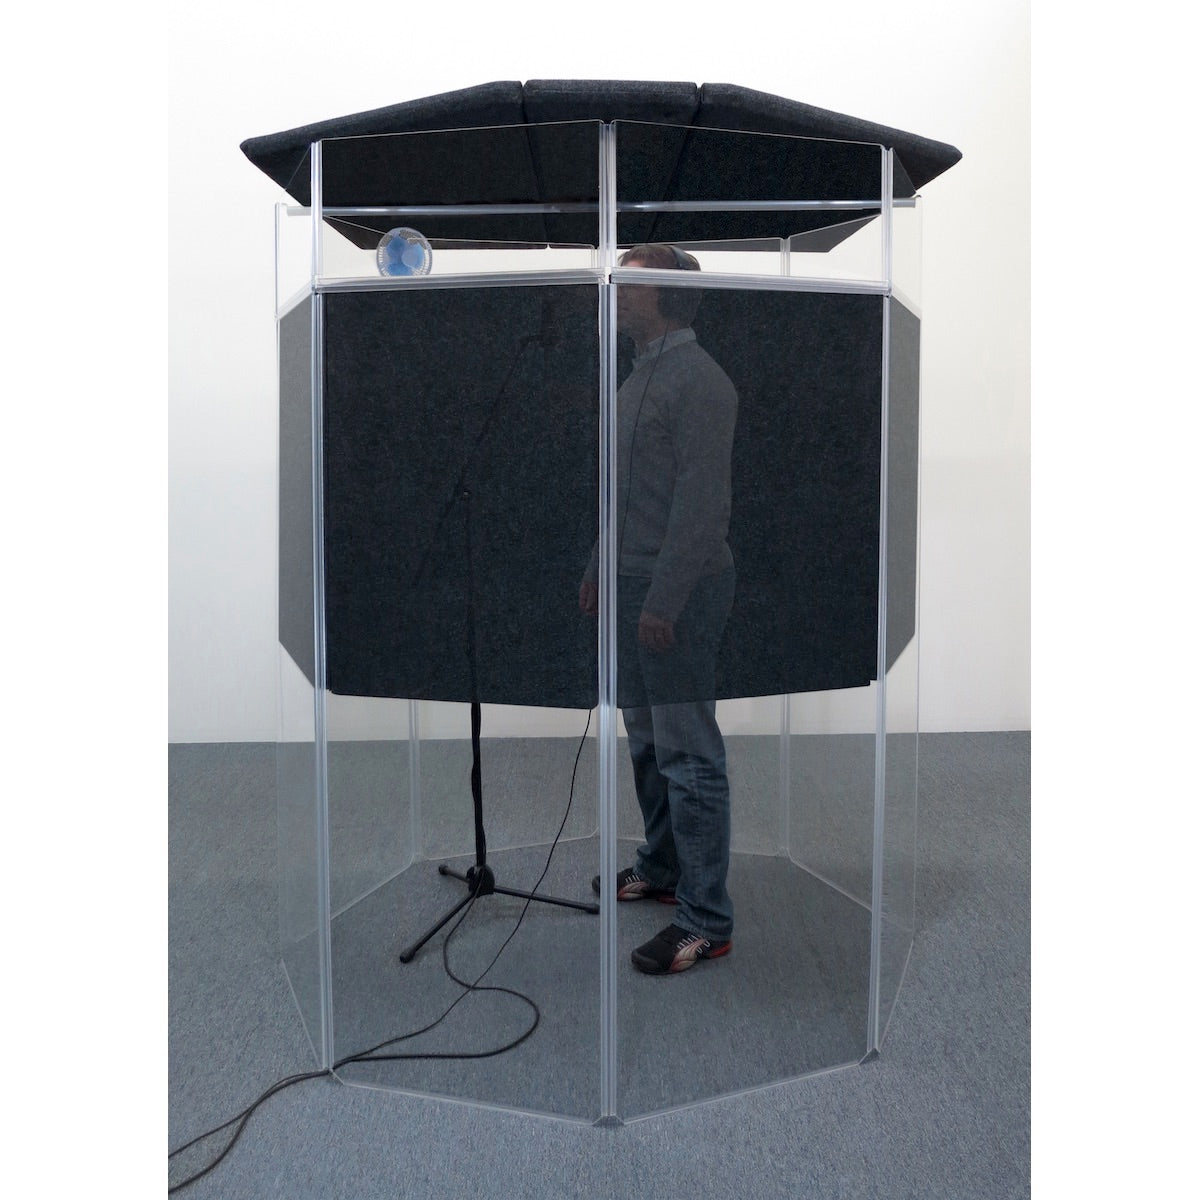 ClearSonic IPJ - IsoPac J Vocal Isolation Booth Package, with person